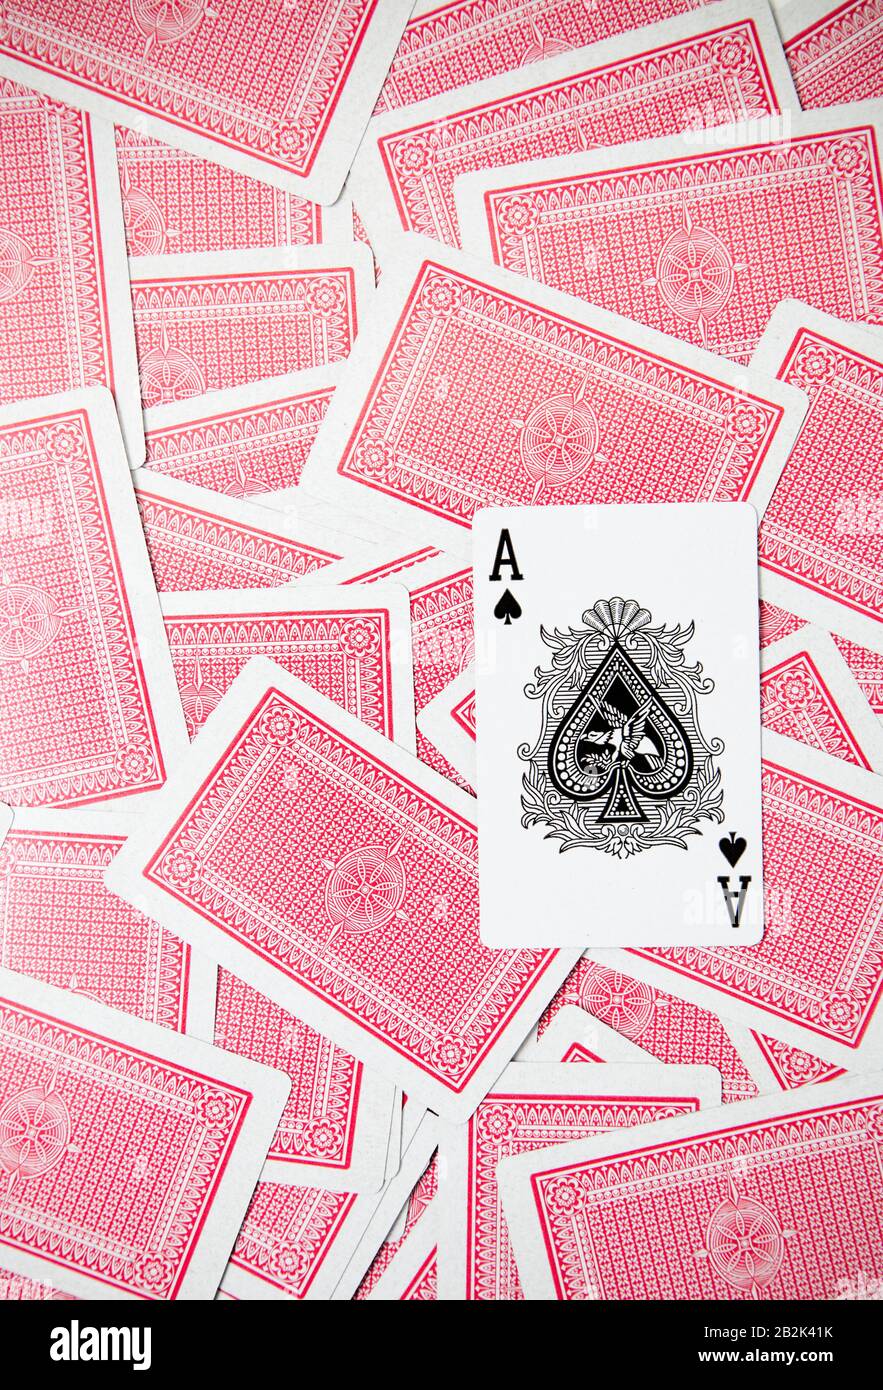 Ace of Spades sitting on top of red backed cards Stock Photo